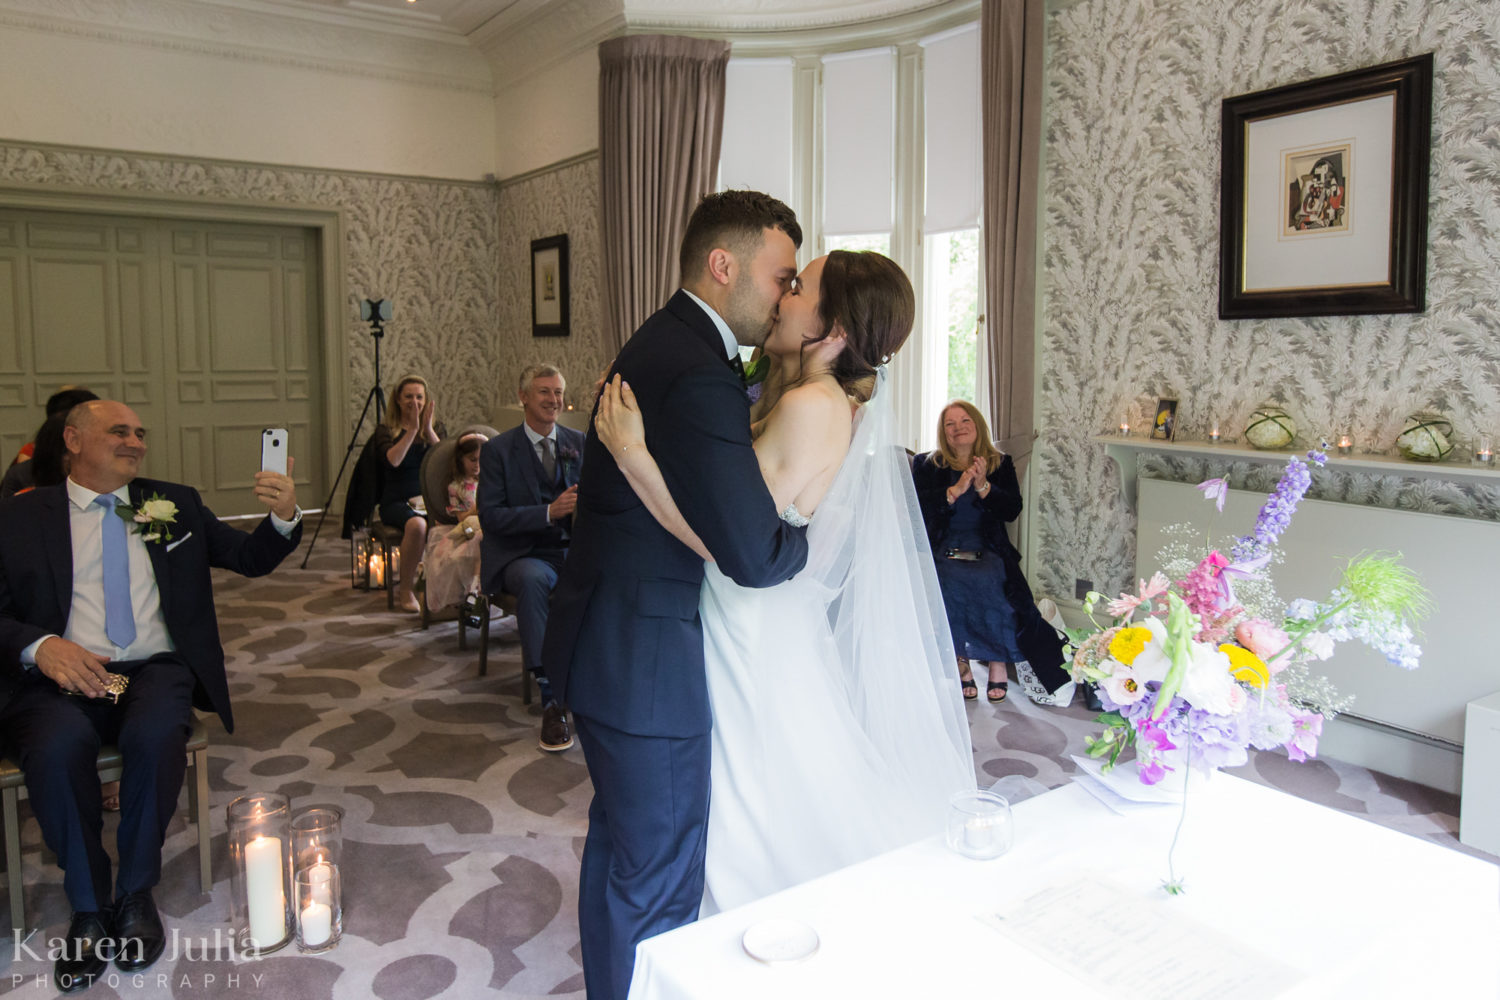 bride embraces groom with a kiss at the end of the wedding ceremony at One Devonshire Gardens